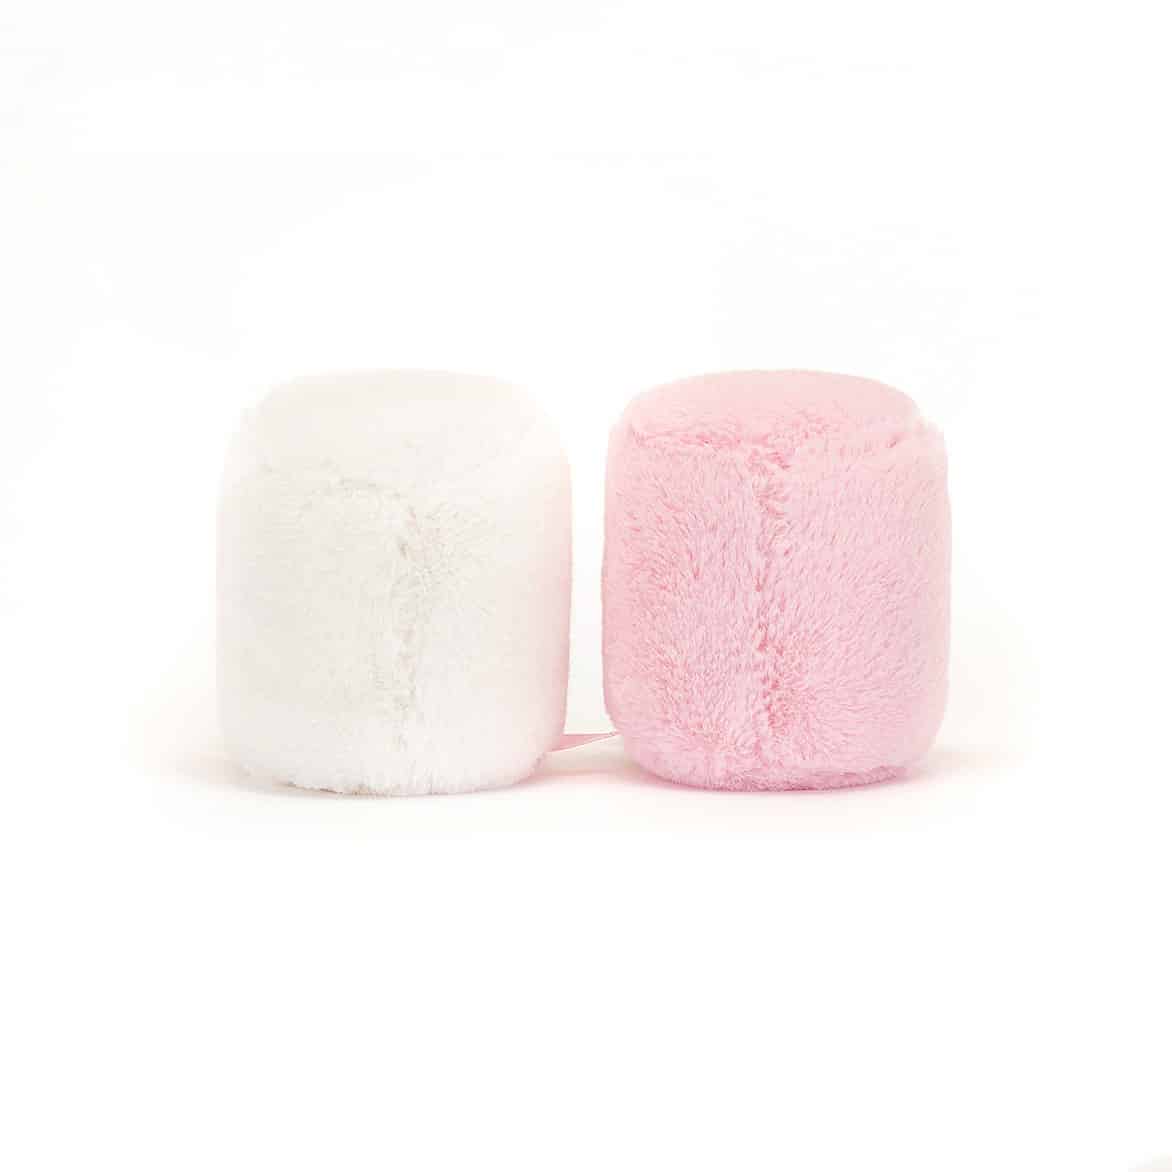 Cuddly Amuseable Marshmallows - Jellycat 